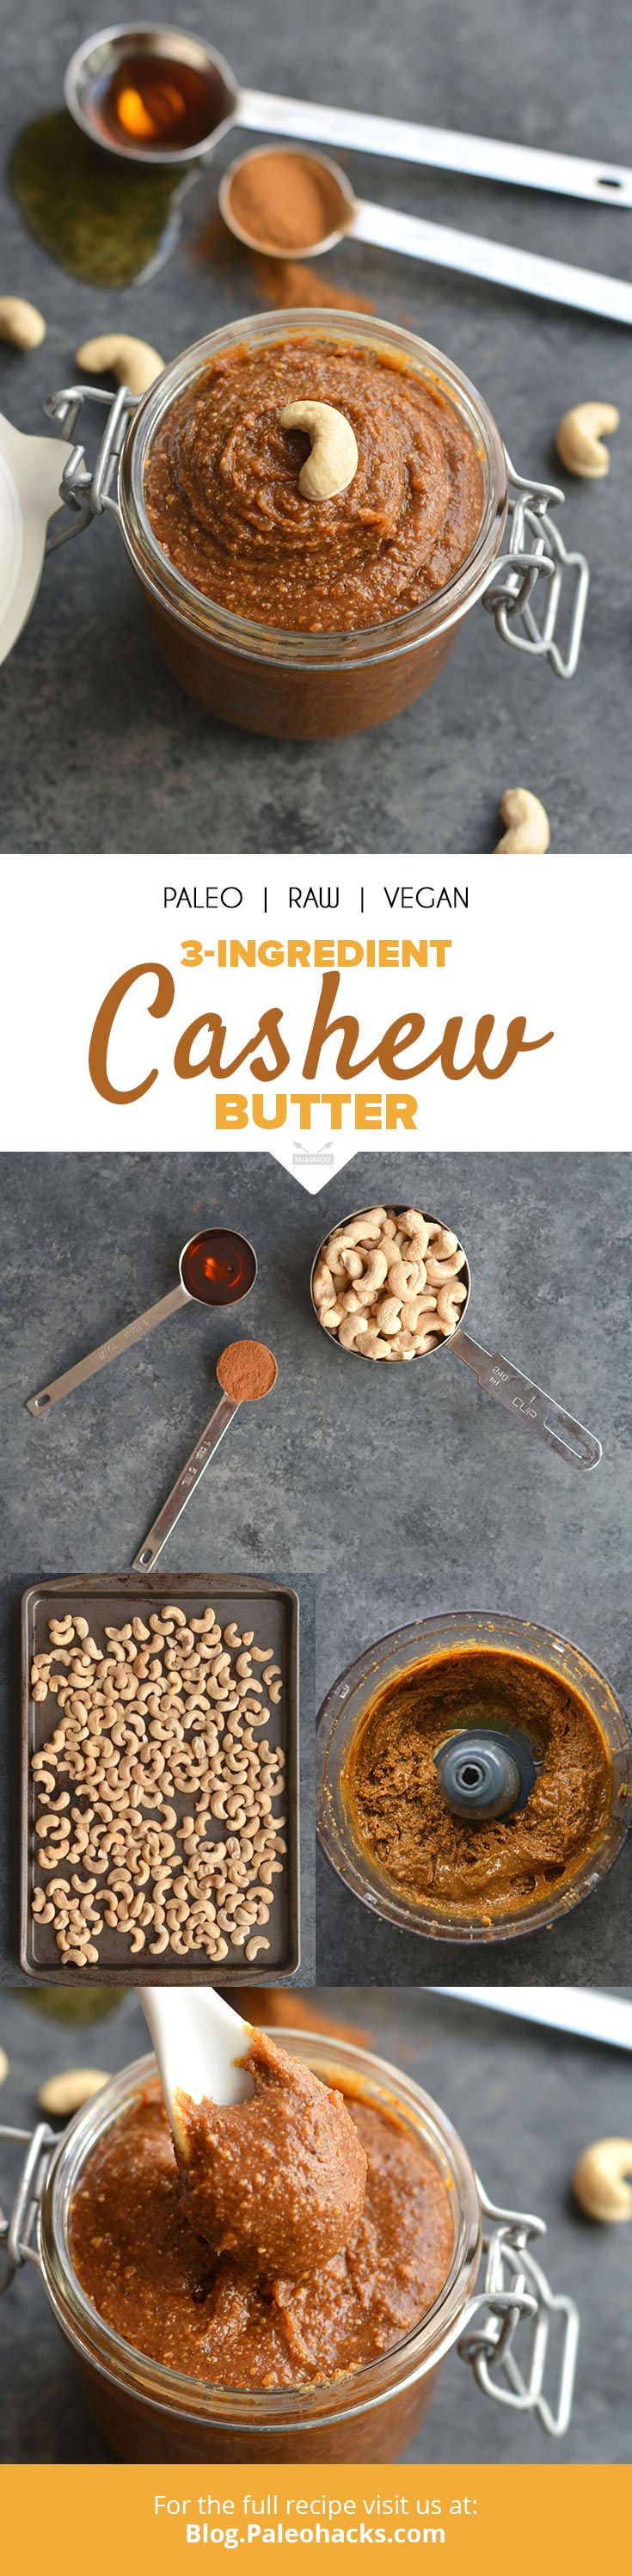 Skip the preservatives (and the price!) of a store-bought jar of cashew butter and whip up this 3-ingredient homemade recipe instead.